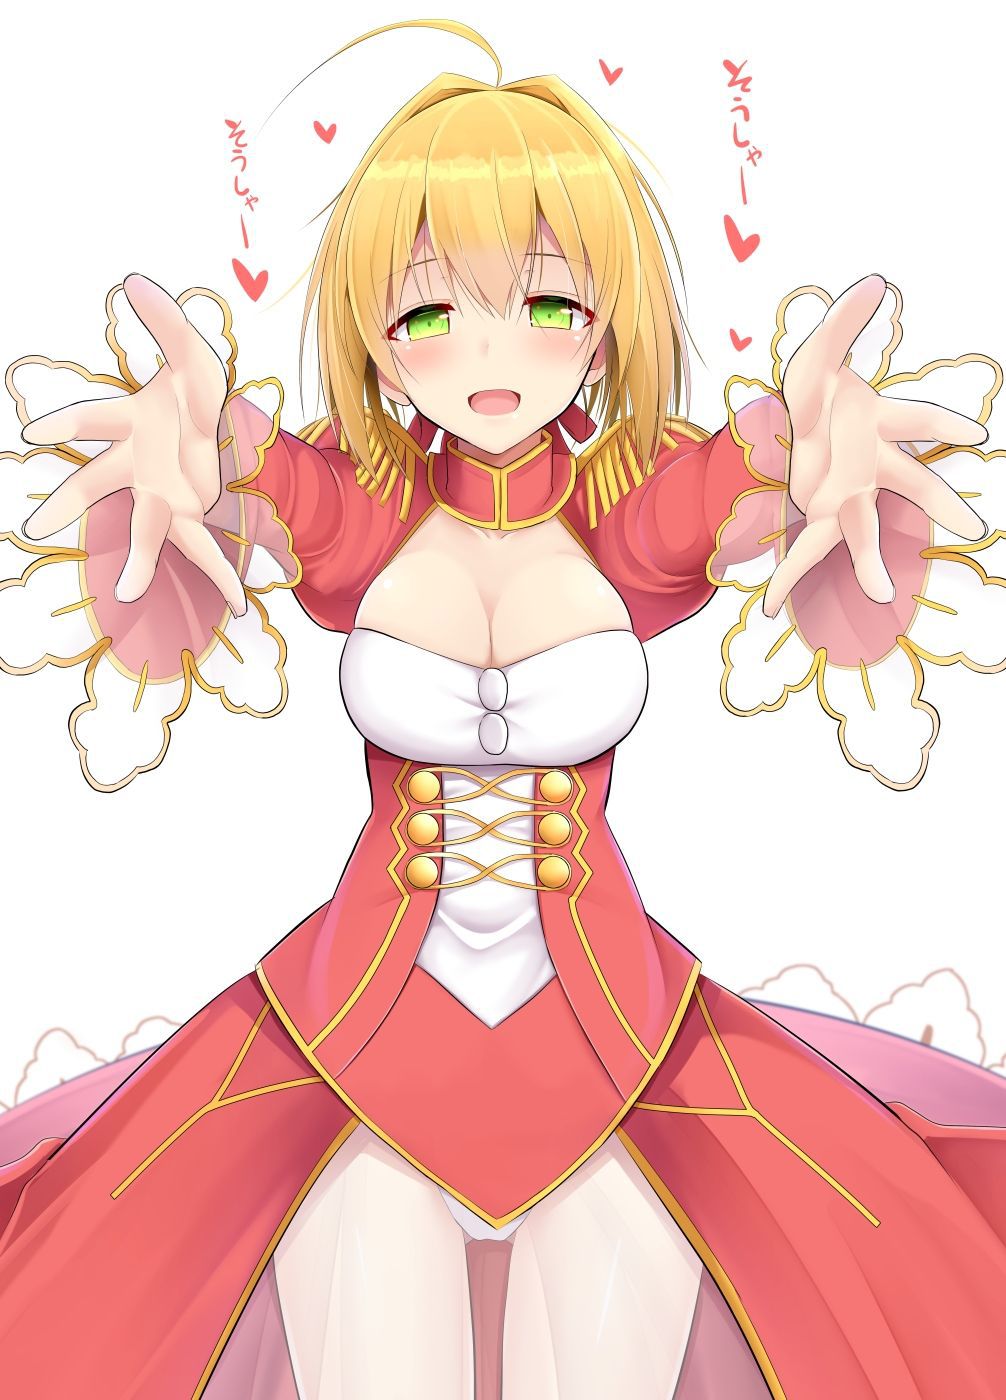 [Secondary ZIP] is about to start anime 100 pieces of cute image summary of Nero Claudius so soon 45